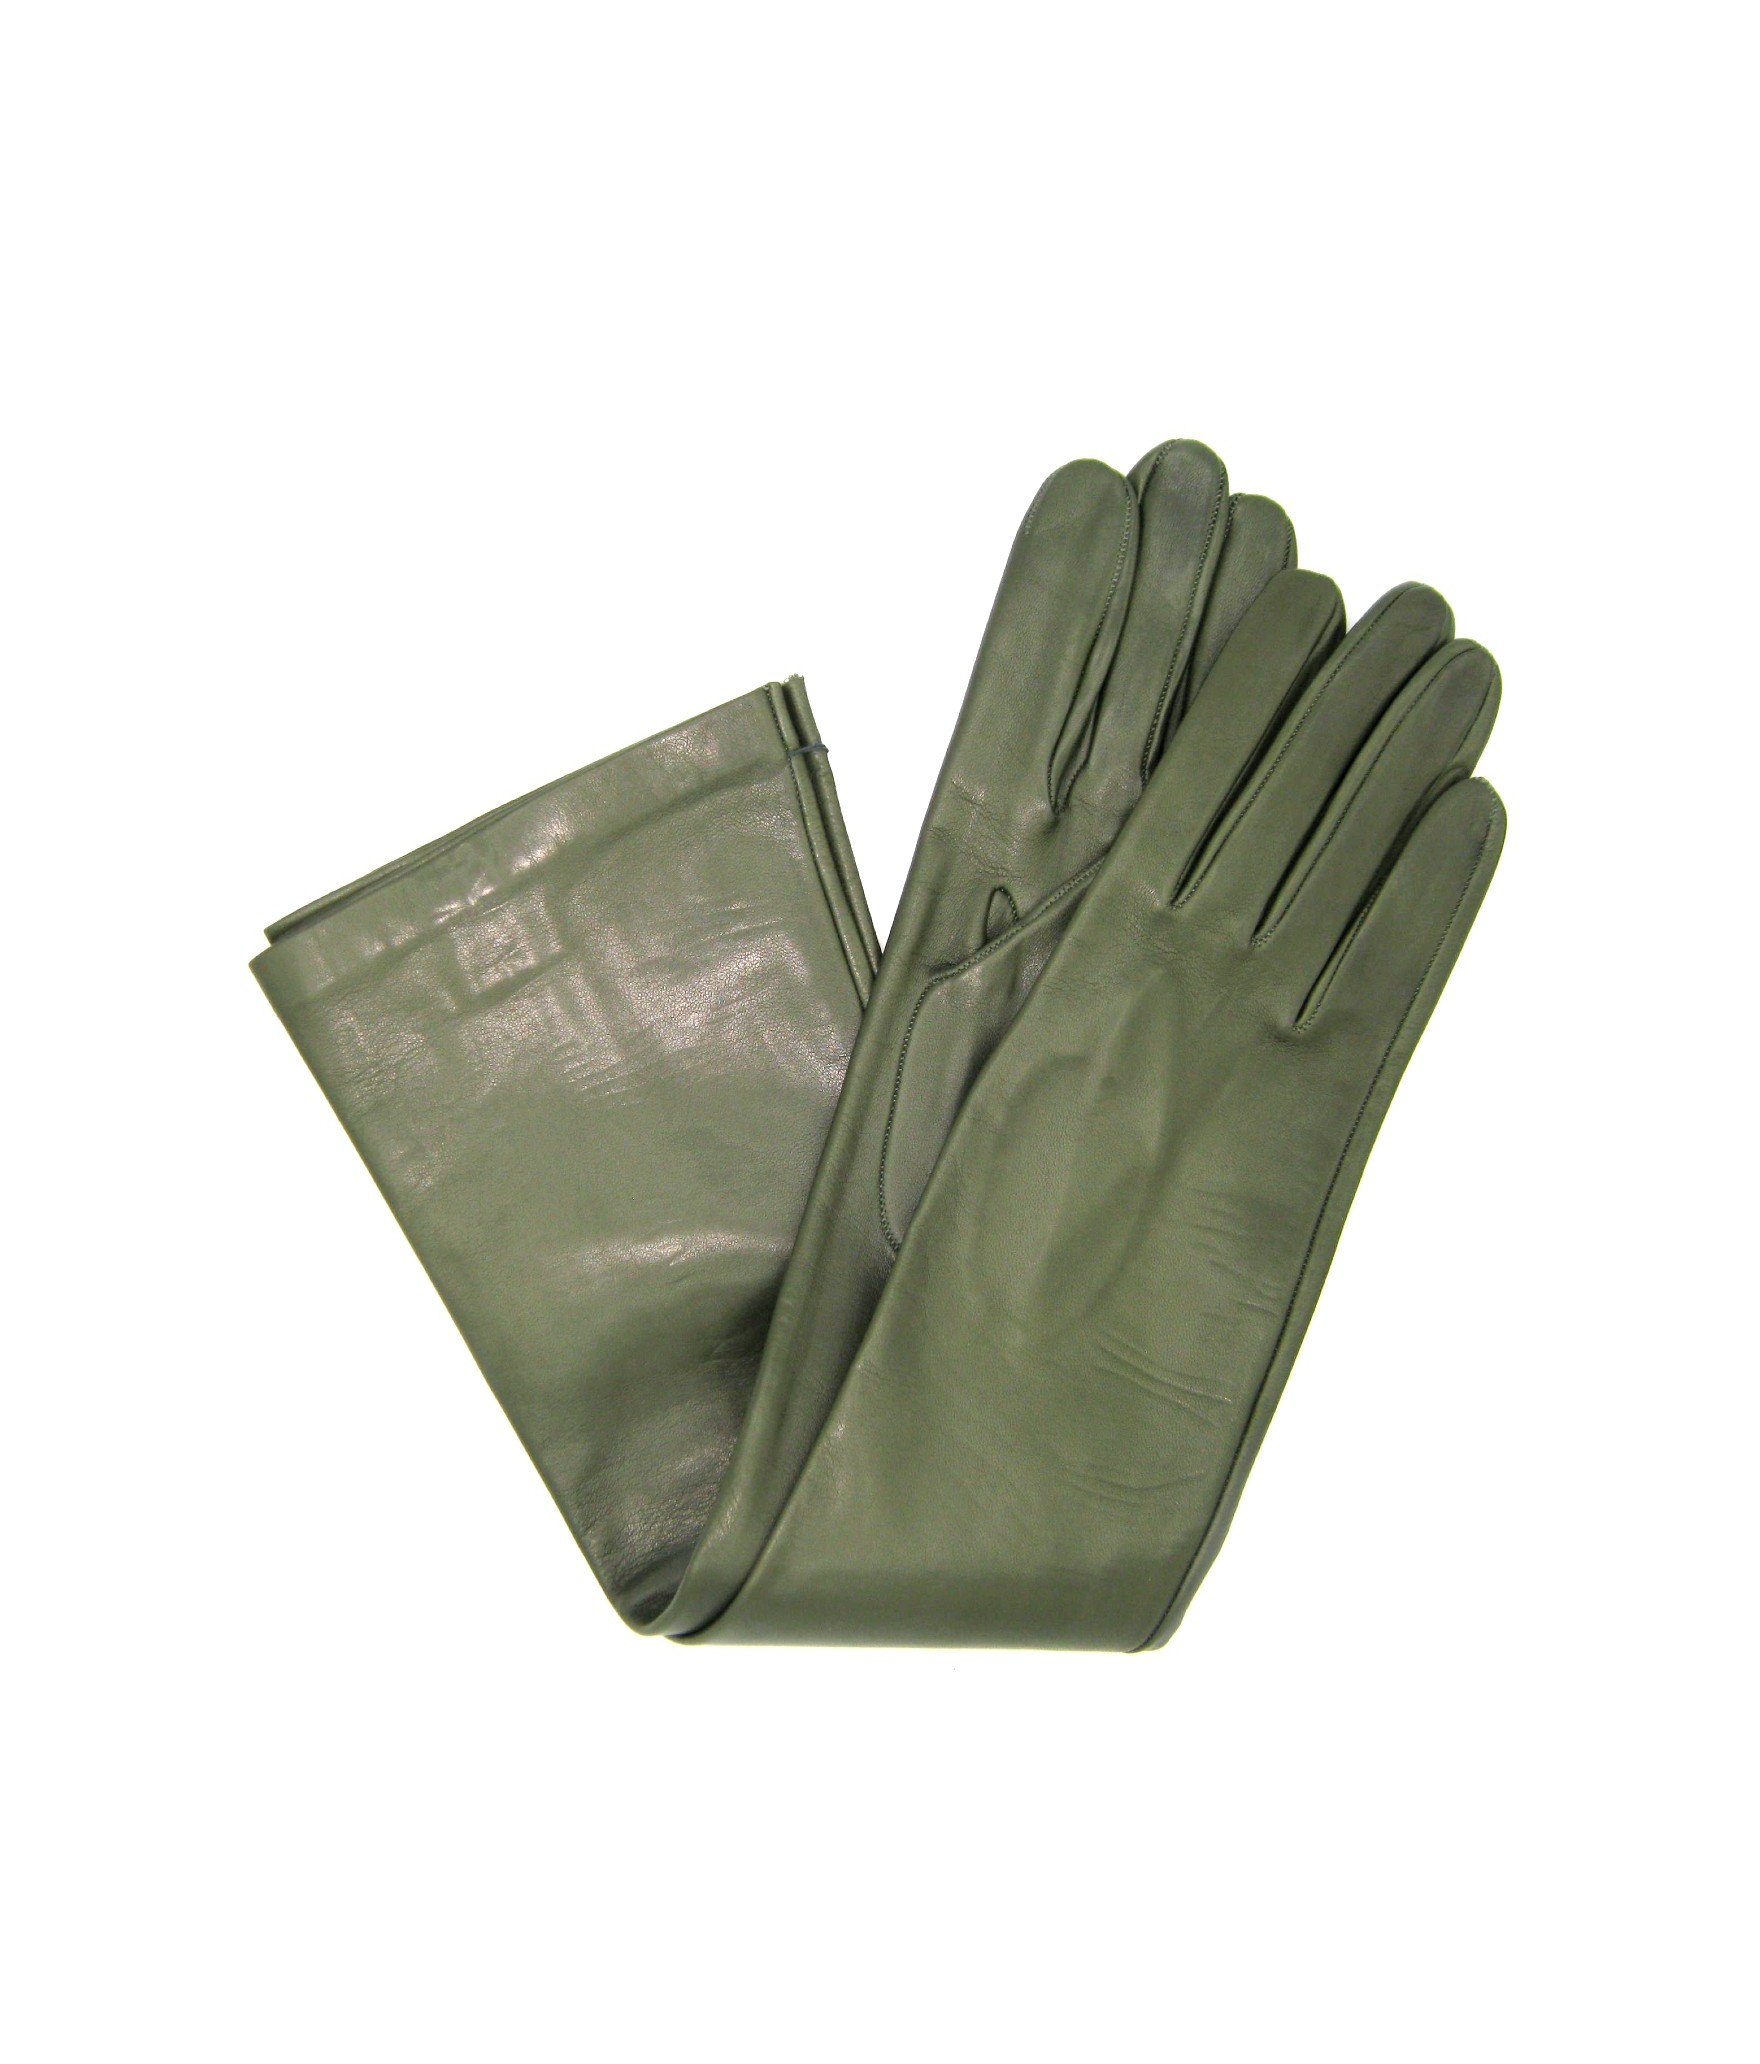 Woman Fashion Nappa leather gloves 10bt silk lined Olive Green